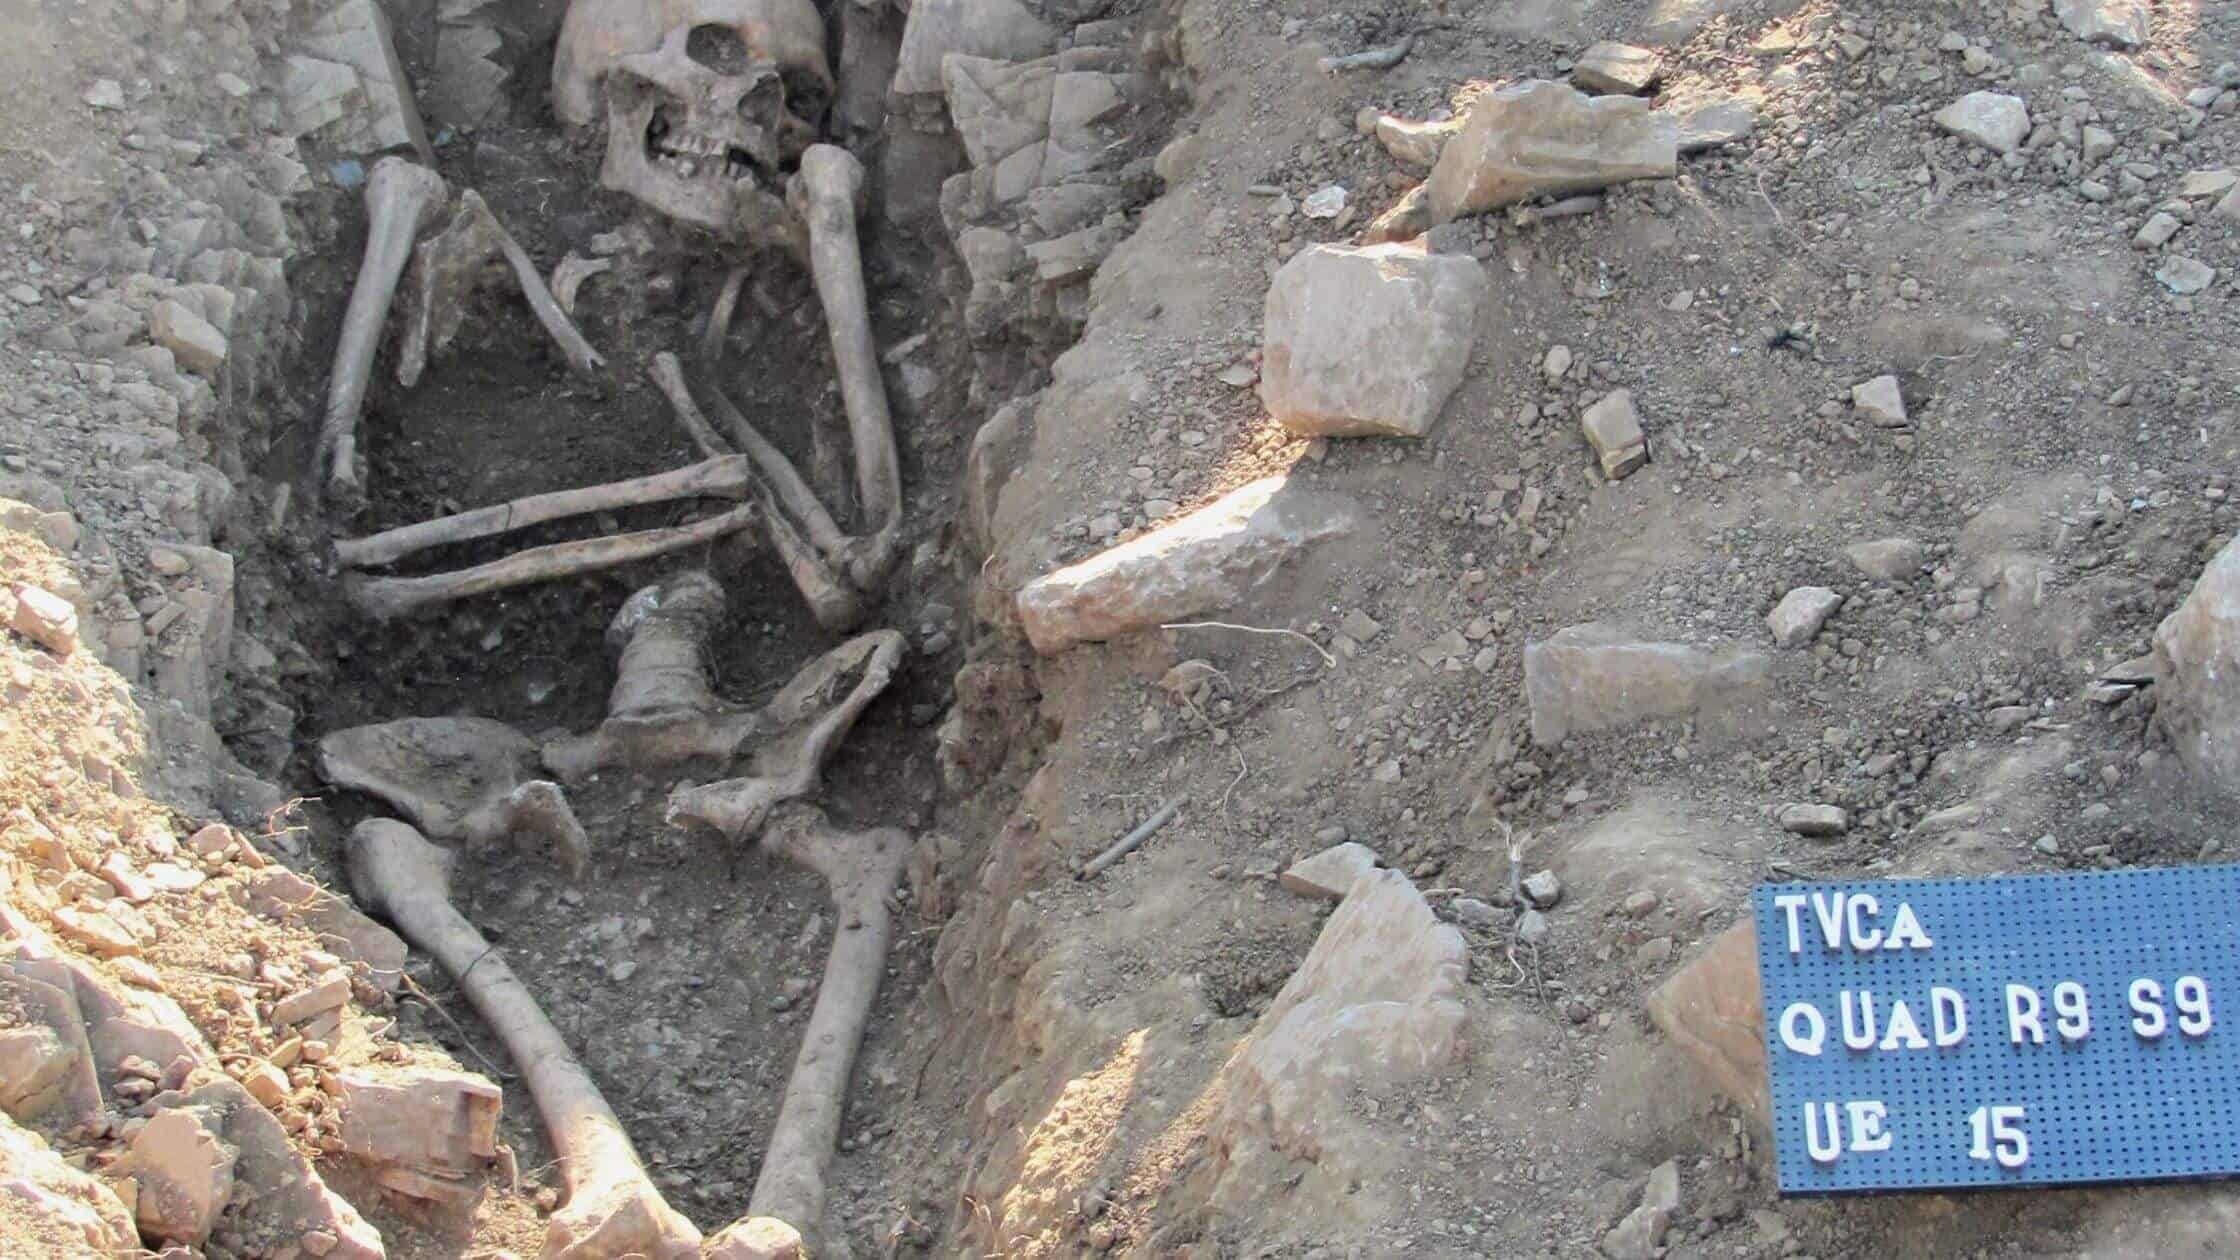 Ancient DNA From A Medieval Skeleton Reveals Klinefelter Syndrome